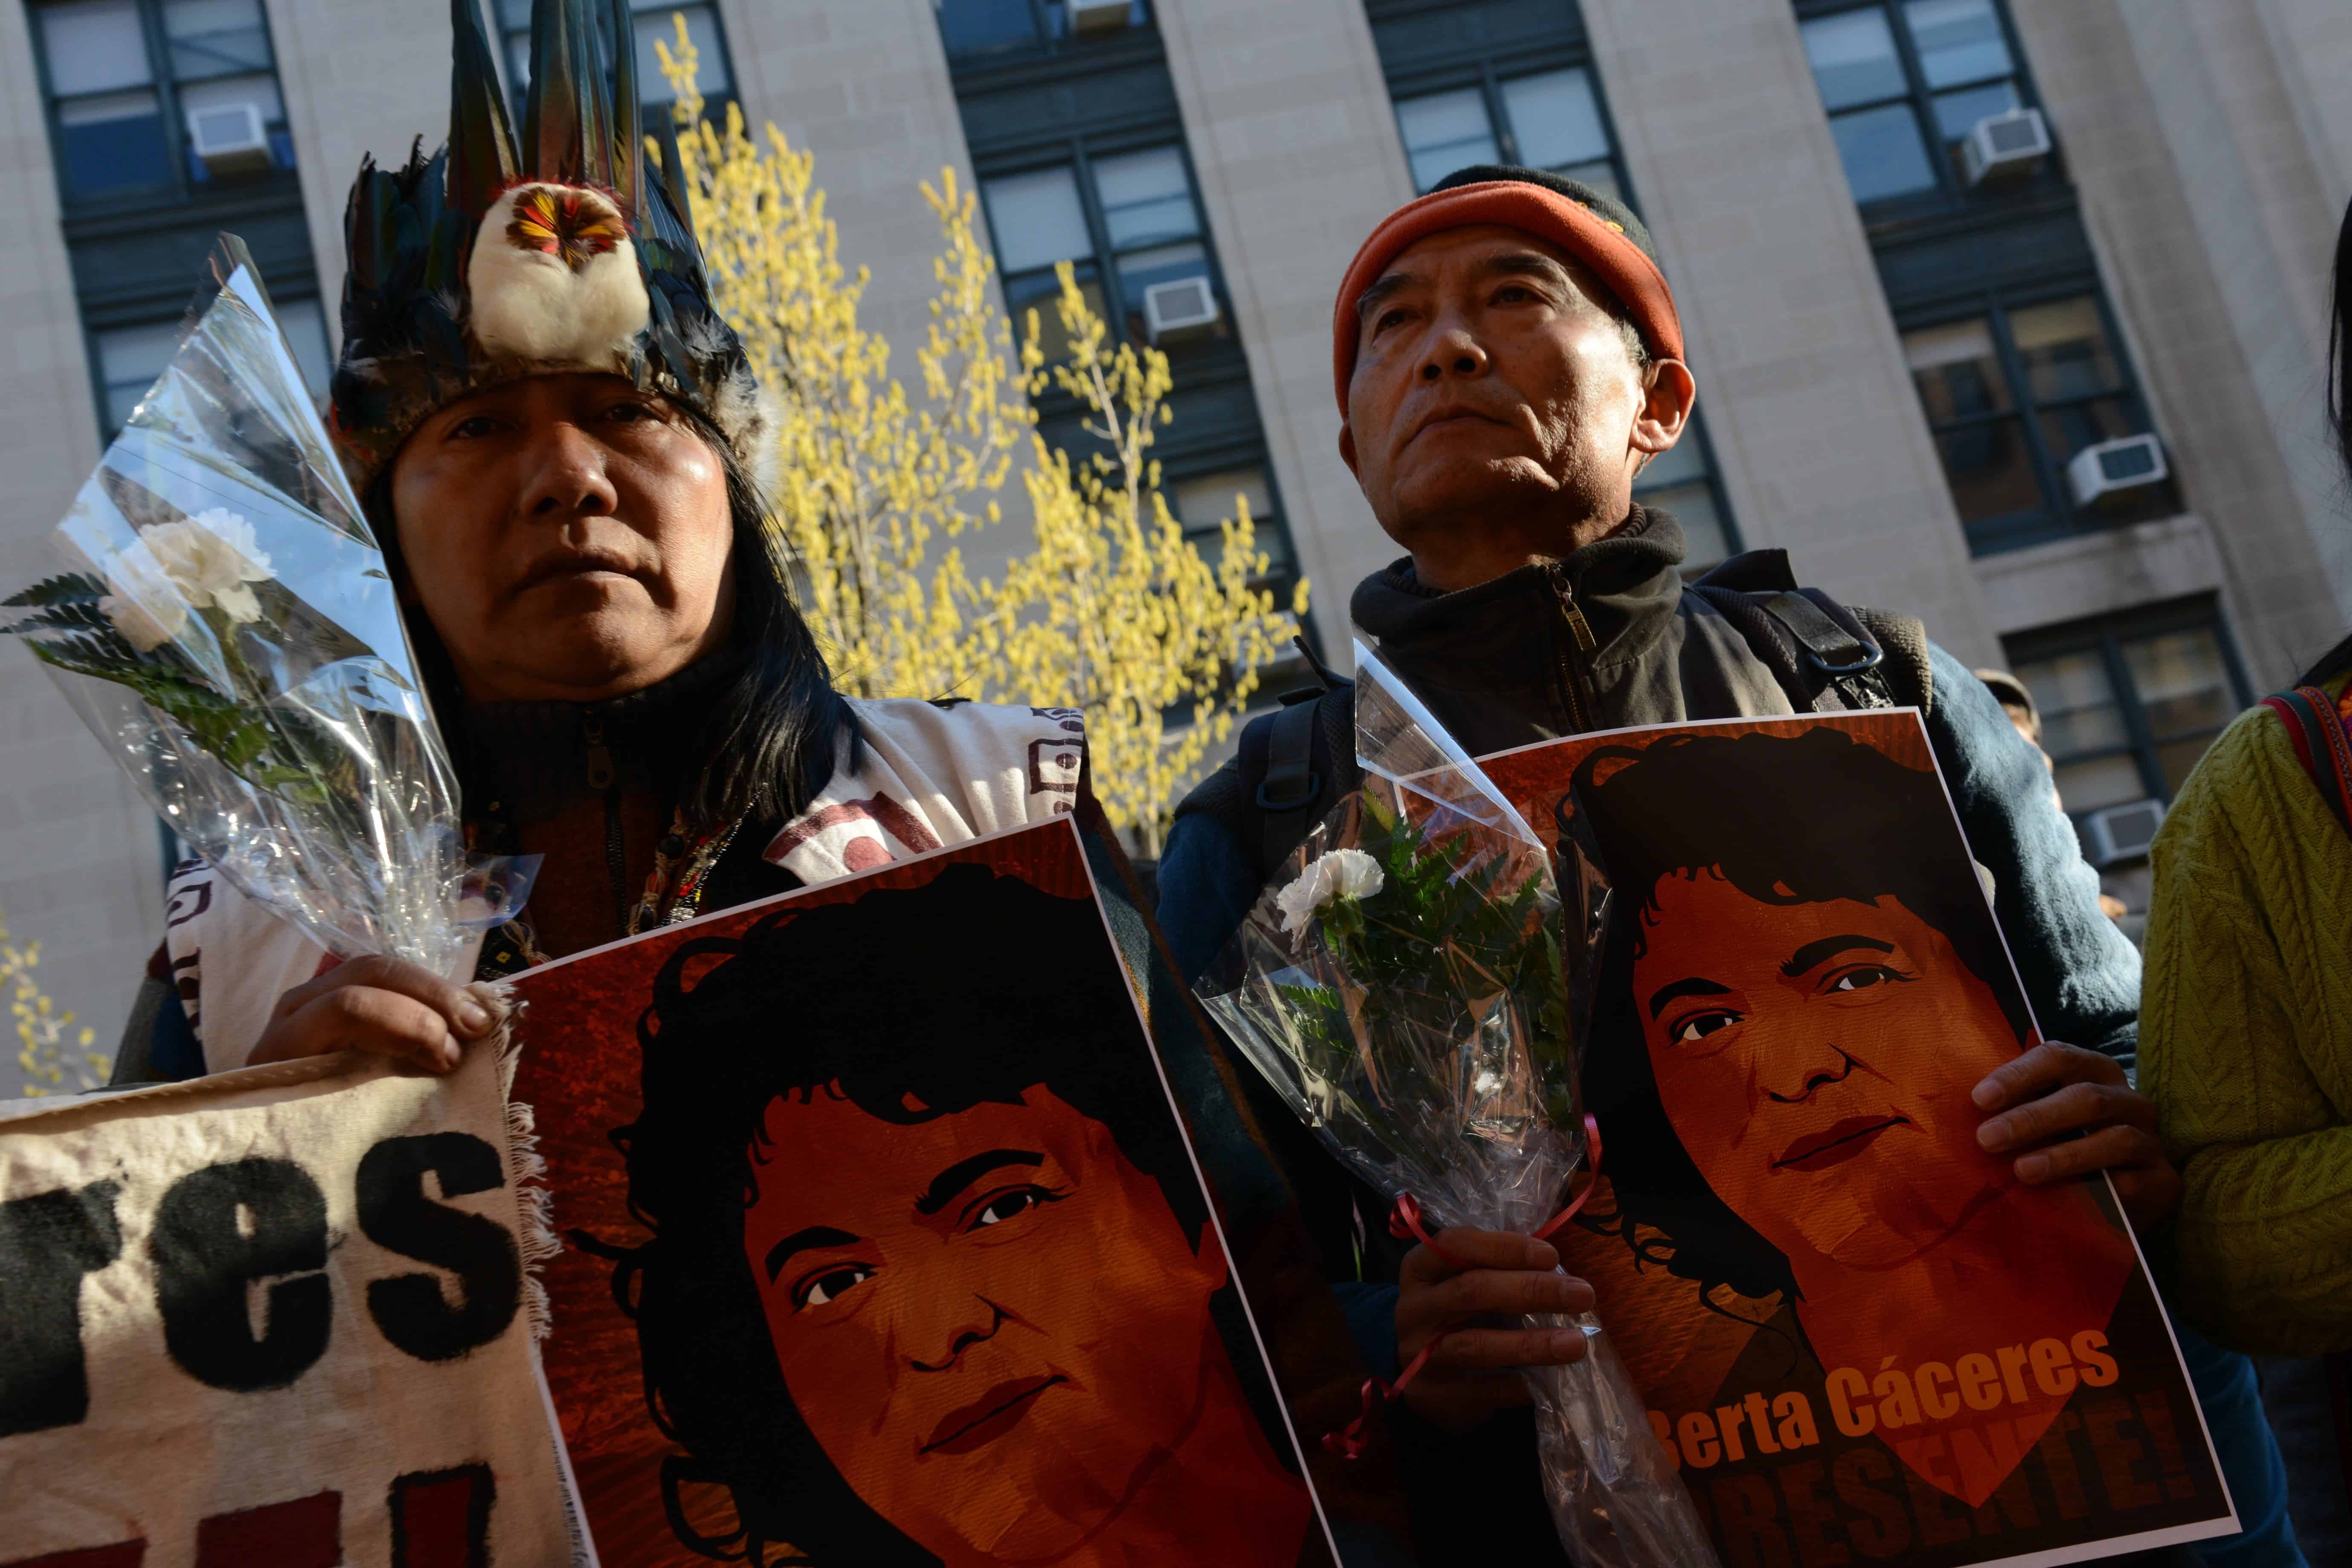 Activist ask for justice following the murder of Berta Caceres, an environmental defender from Honduras. Credit: Flickr